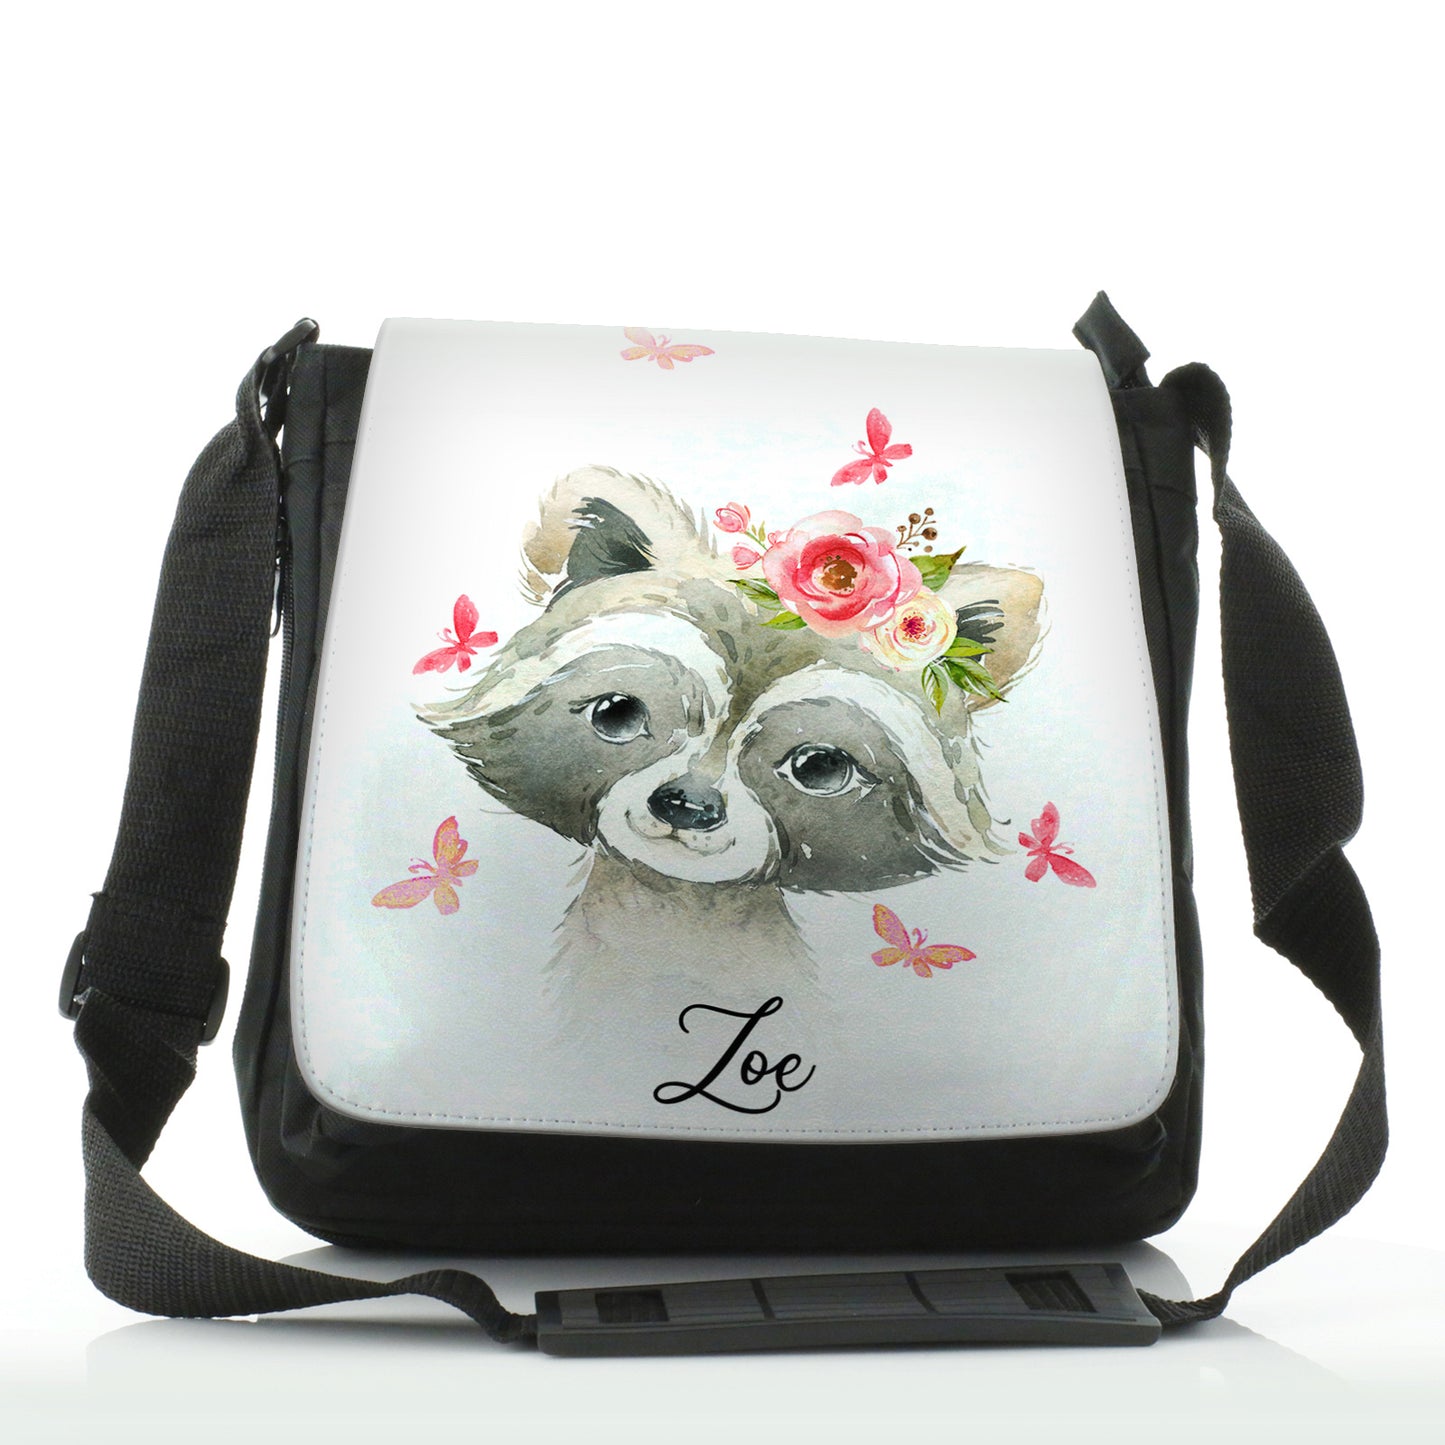 Personalised Shoulder Bag with Raccoon Pink Butterfly Flowers and Cute Text